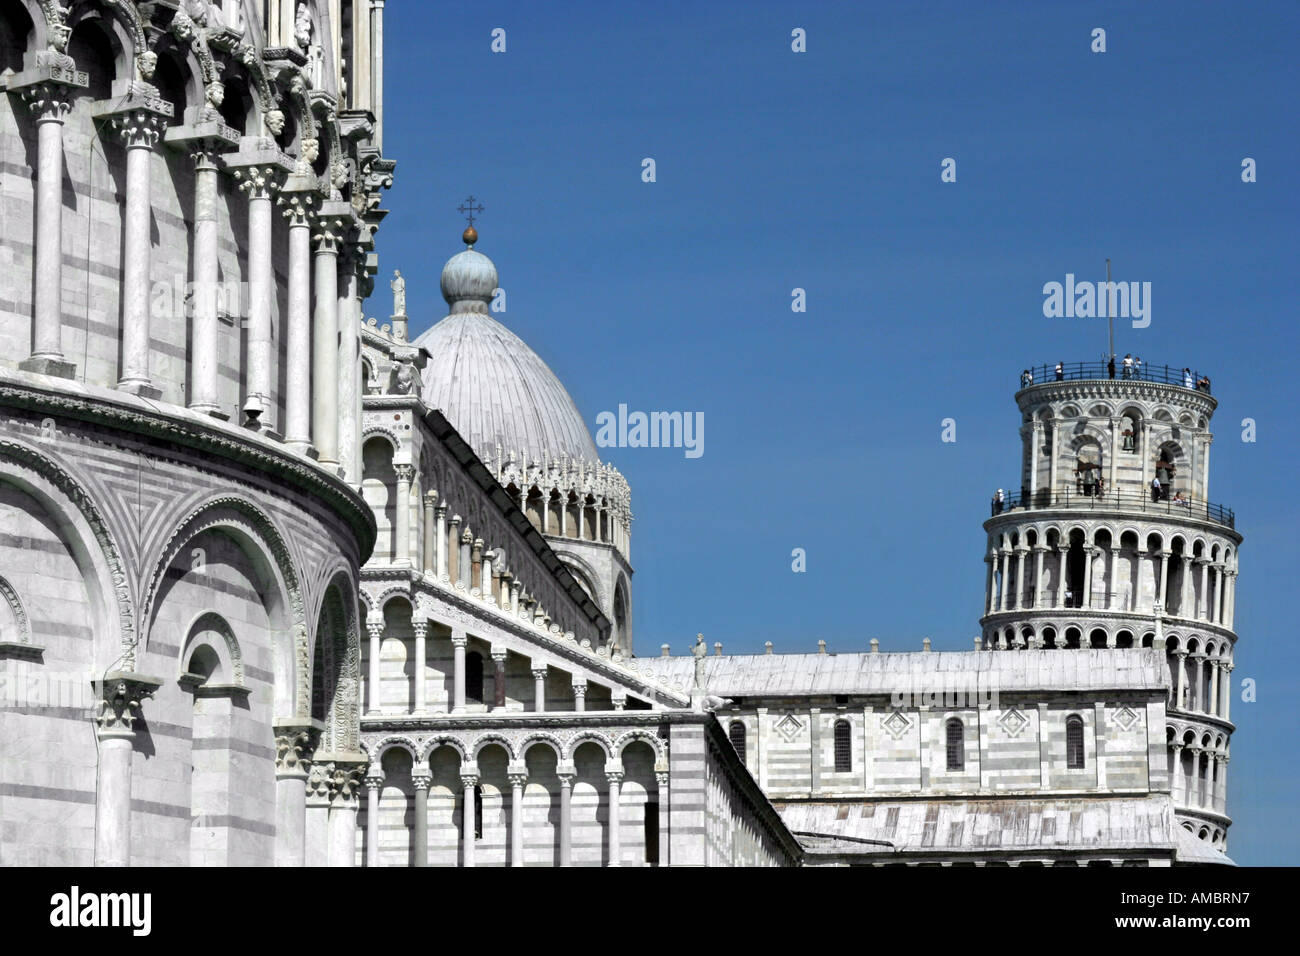 Pisa Italy leaning Tower of Pisa and the Campo dei Miracoli Stock Photo